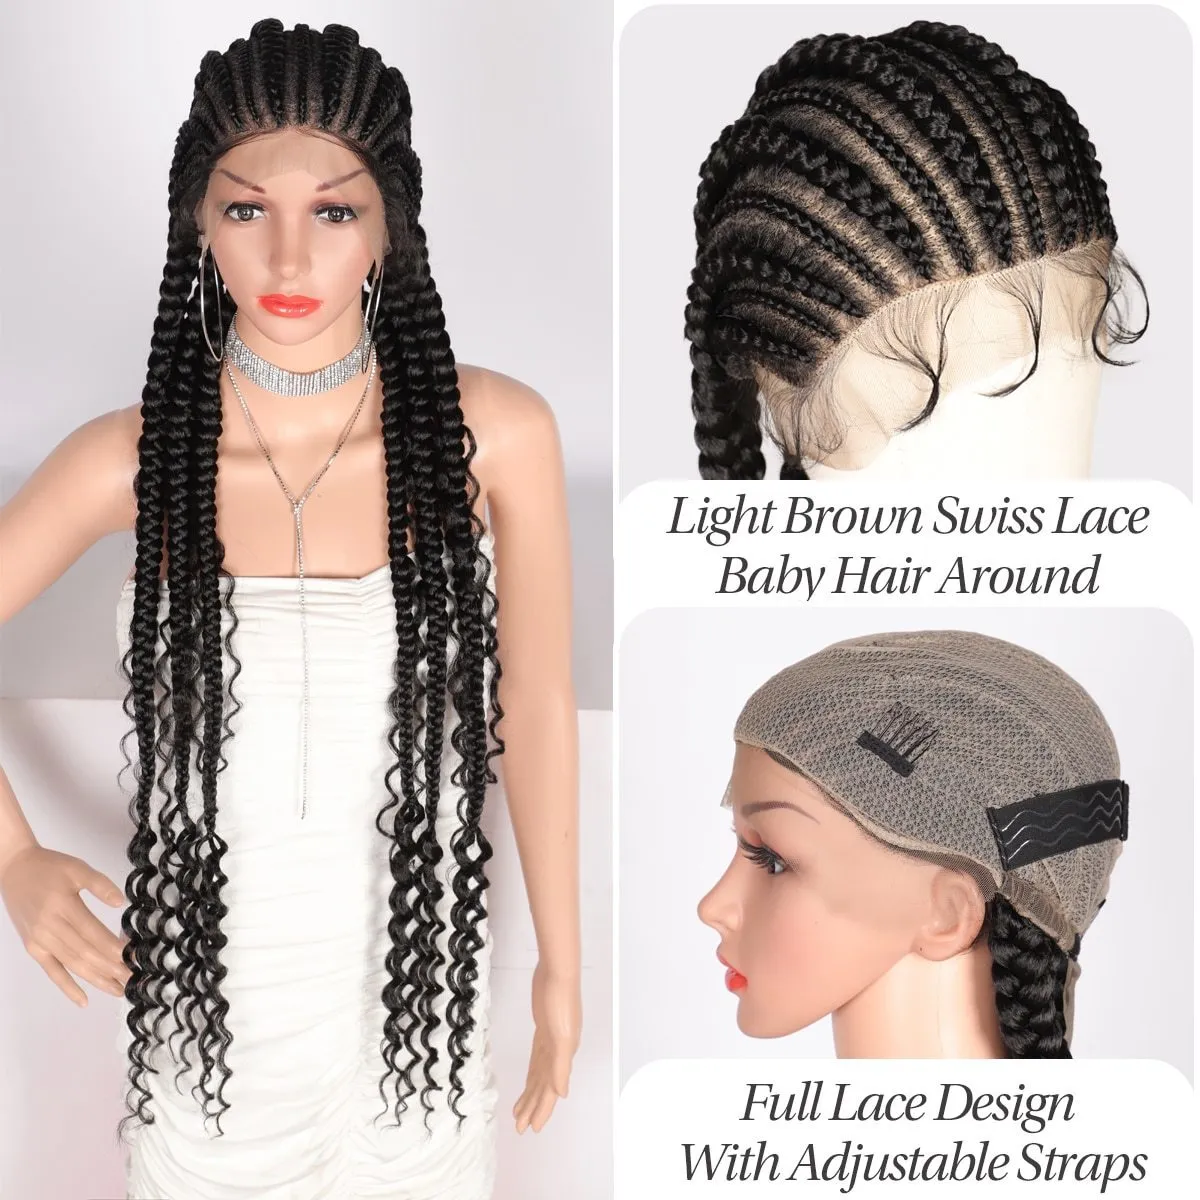 Human Hair Wigs Kalyss Synthetic Box Cornrow Braided 35 Full Lace Front Wig  Braiding Afro Braid Wig With Baby For Black Women 230217 From 62,76 €